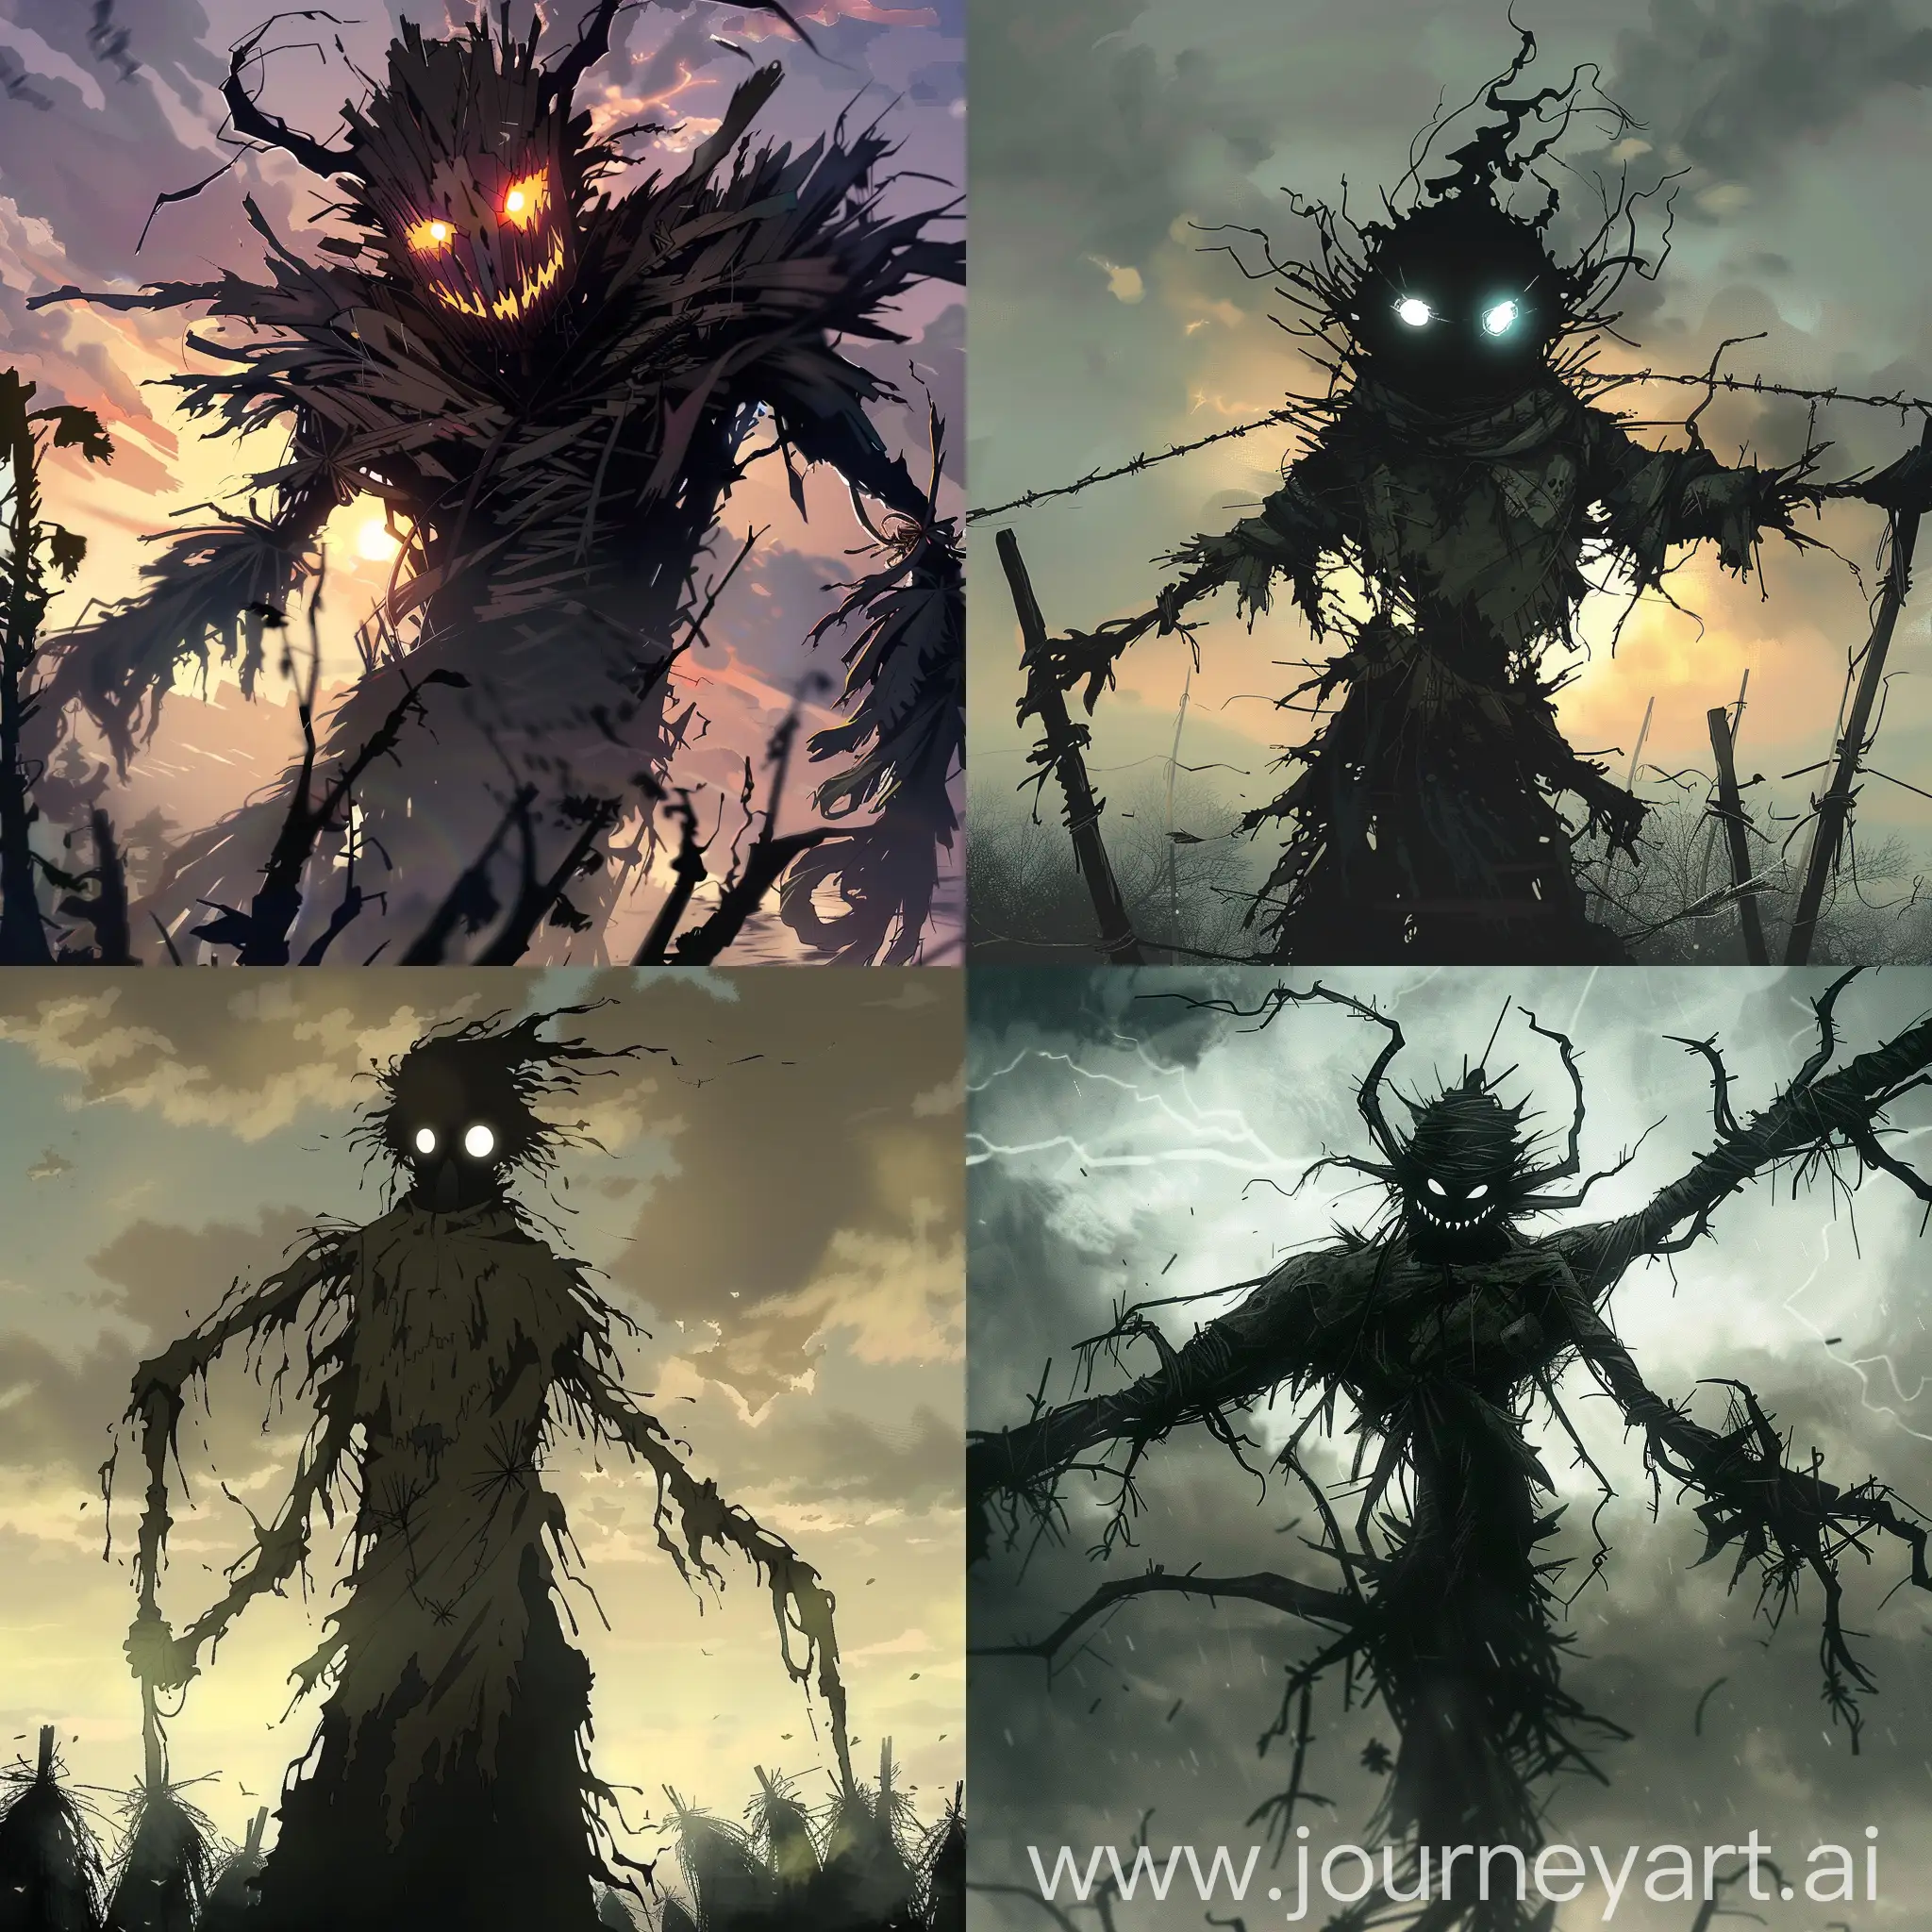 An anime style powerful, terrifying and giant physiquic shadow scarecrow monster.